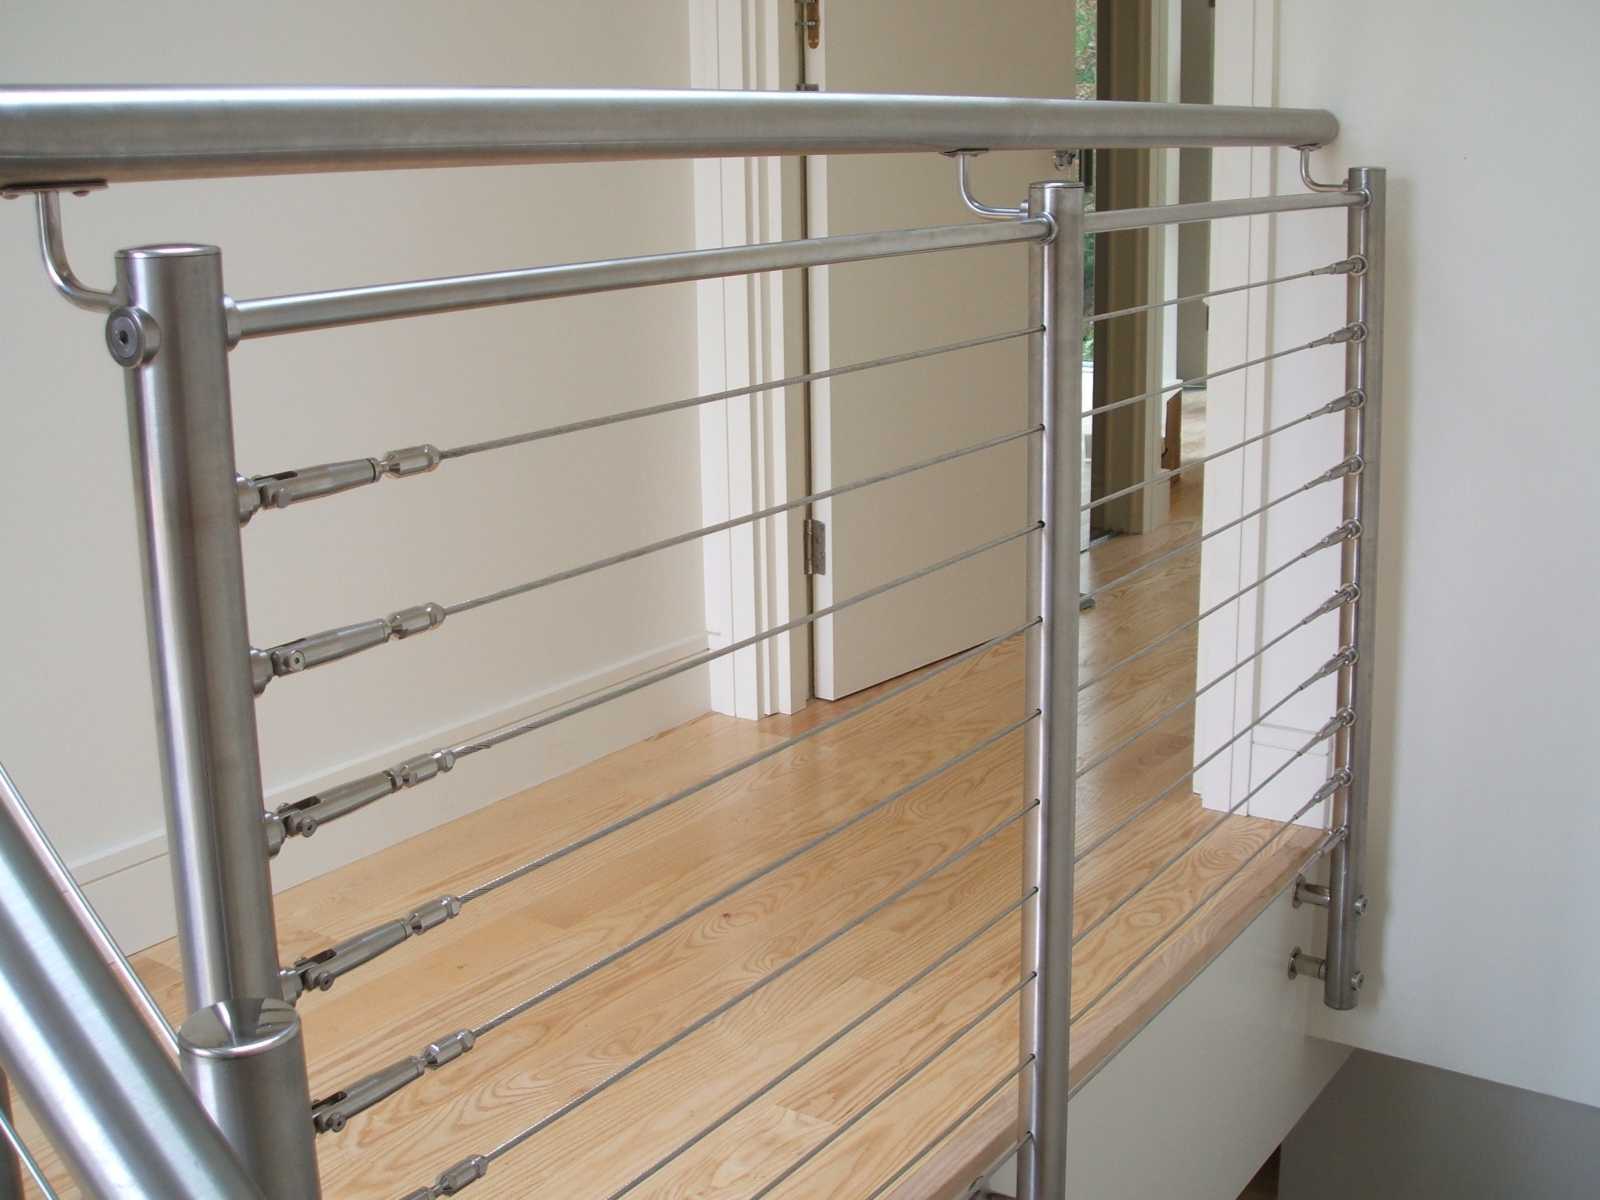 Stainless steel handrail with steel wire infill